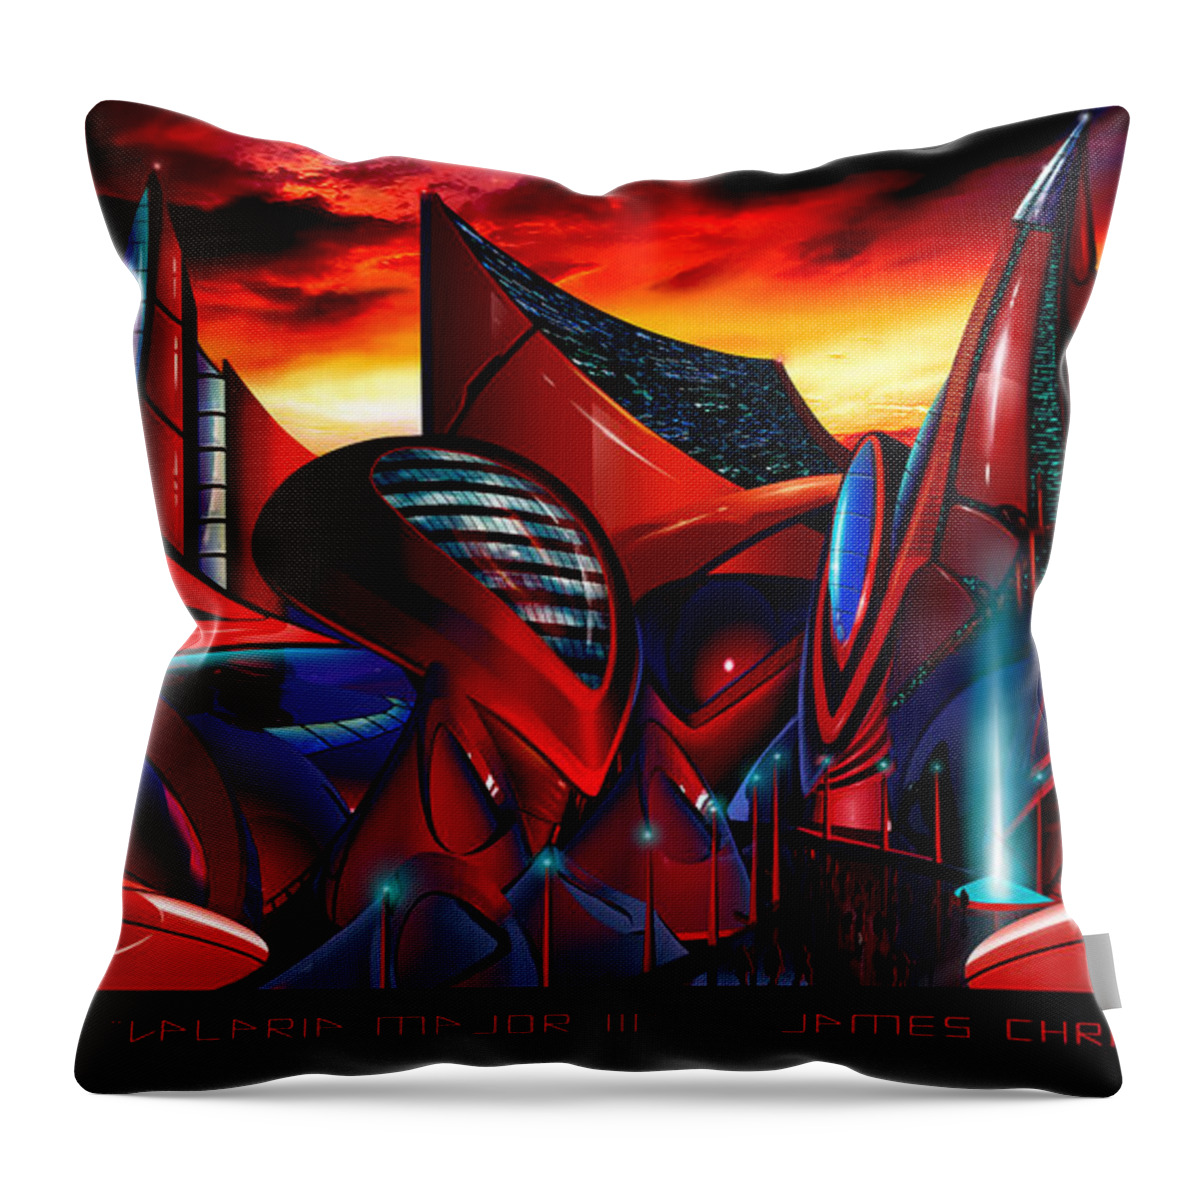 Science Fiction City Throw Pillow featuring the painting Valaria Major III by James Hill